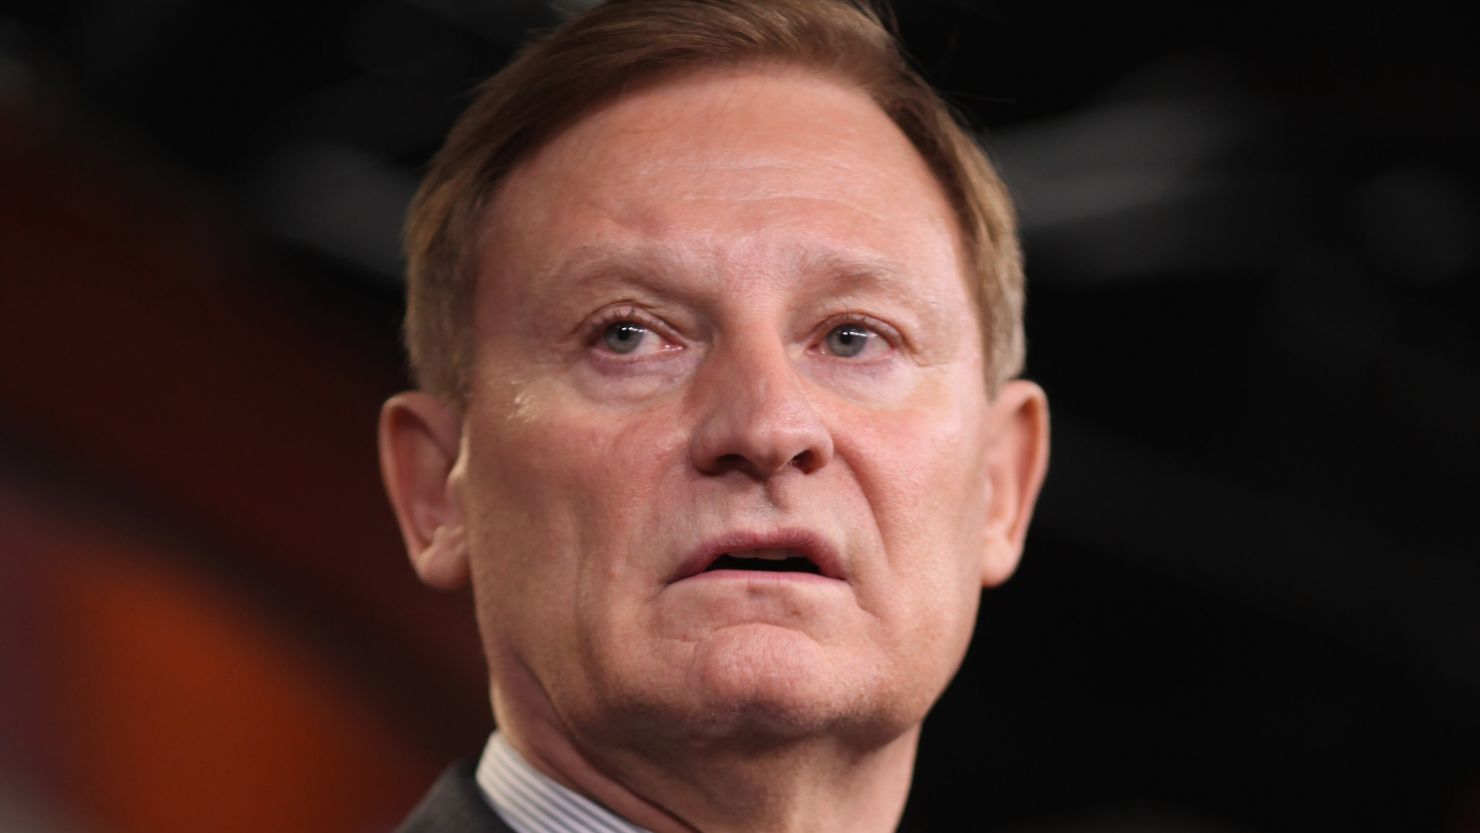 Rep. Spencer Bachus of Alabama says, "I have fully abided by the rules governing members of Congress."